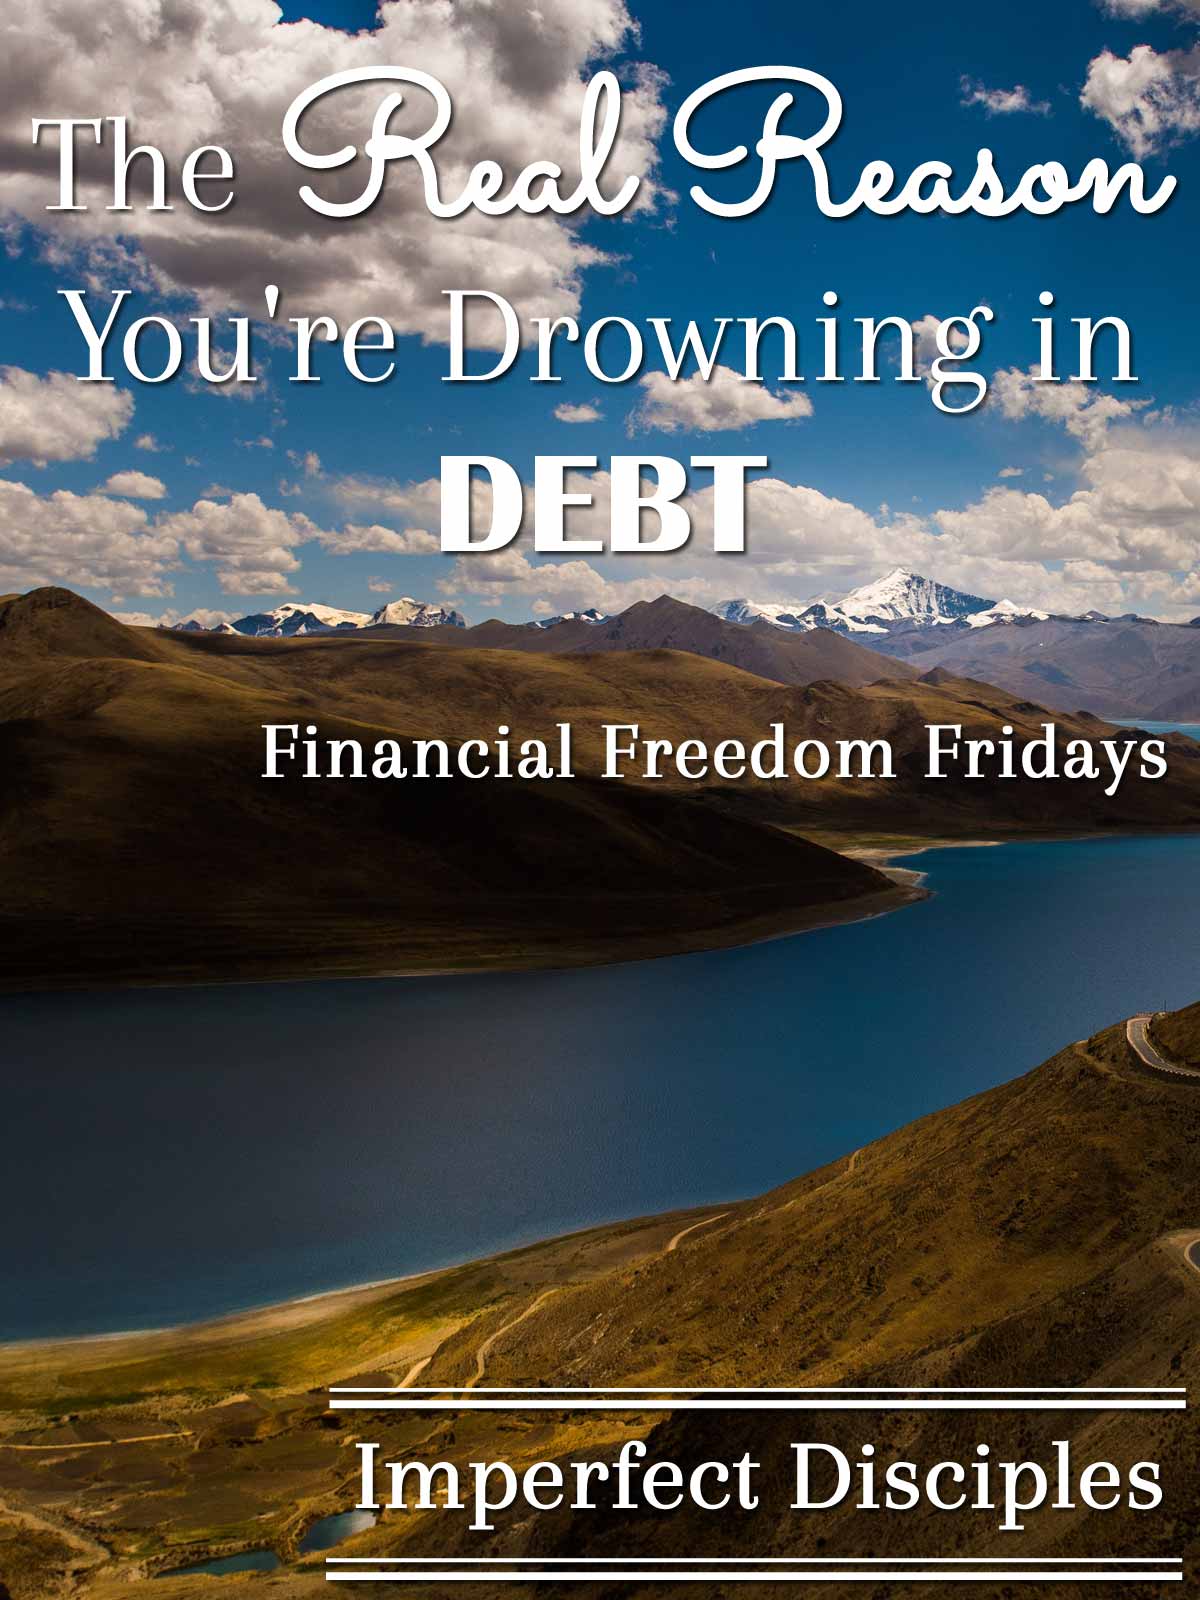 The Real Reason you're drowning in debt - Financial Freedom Fridays